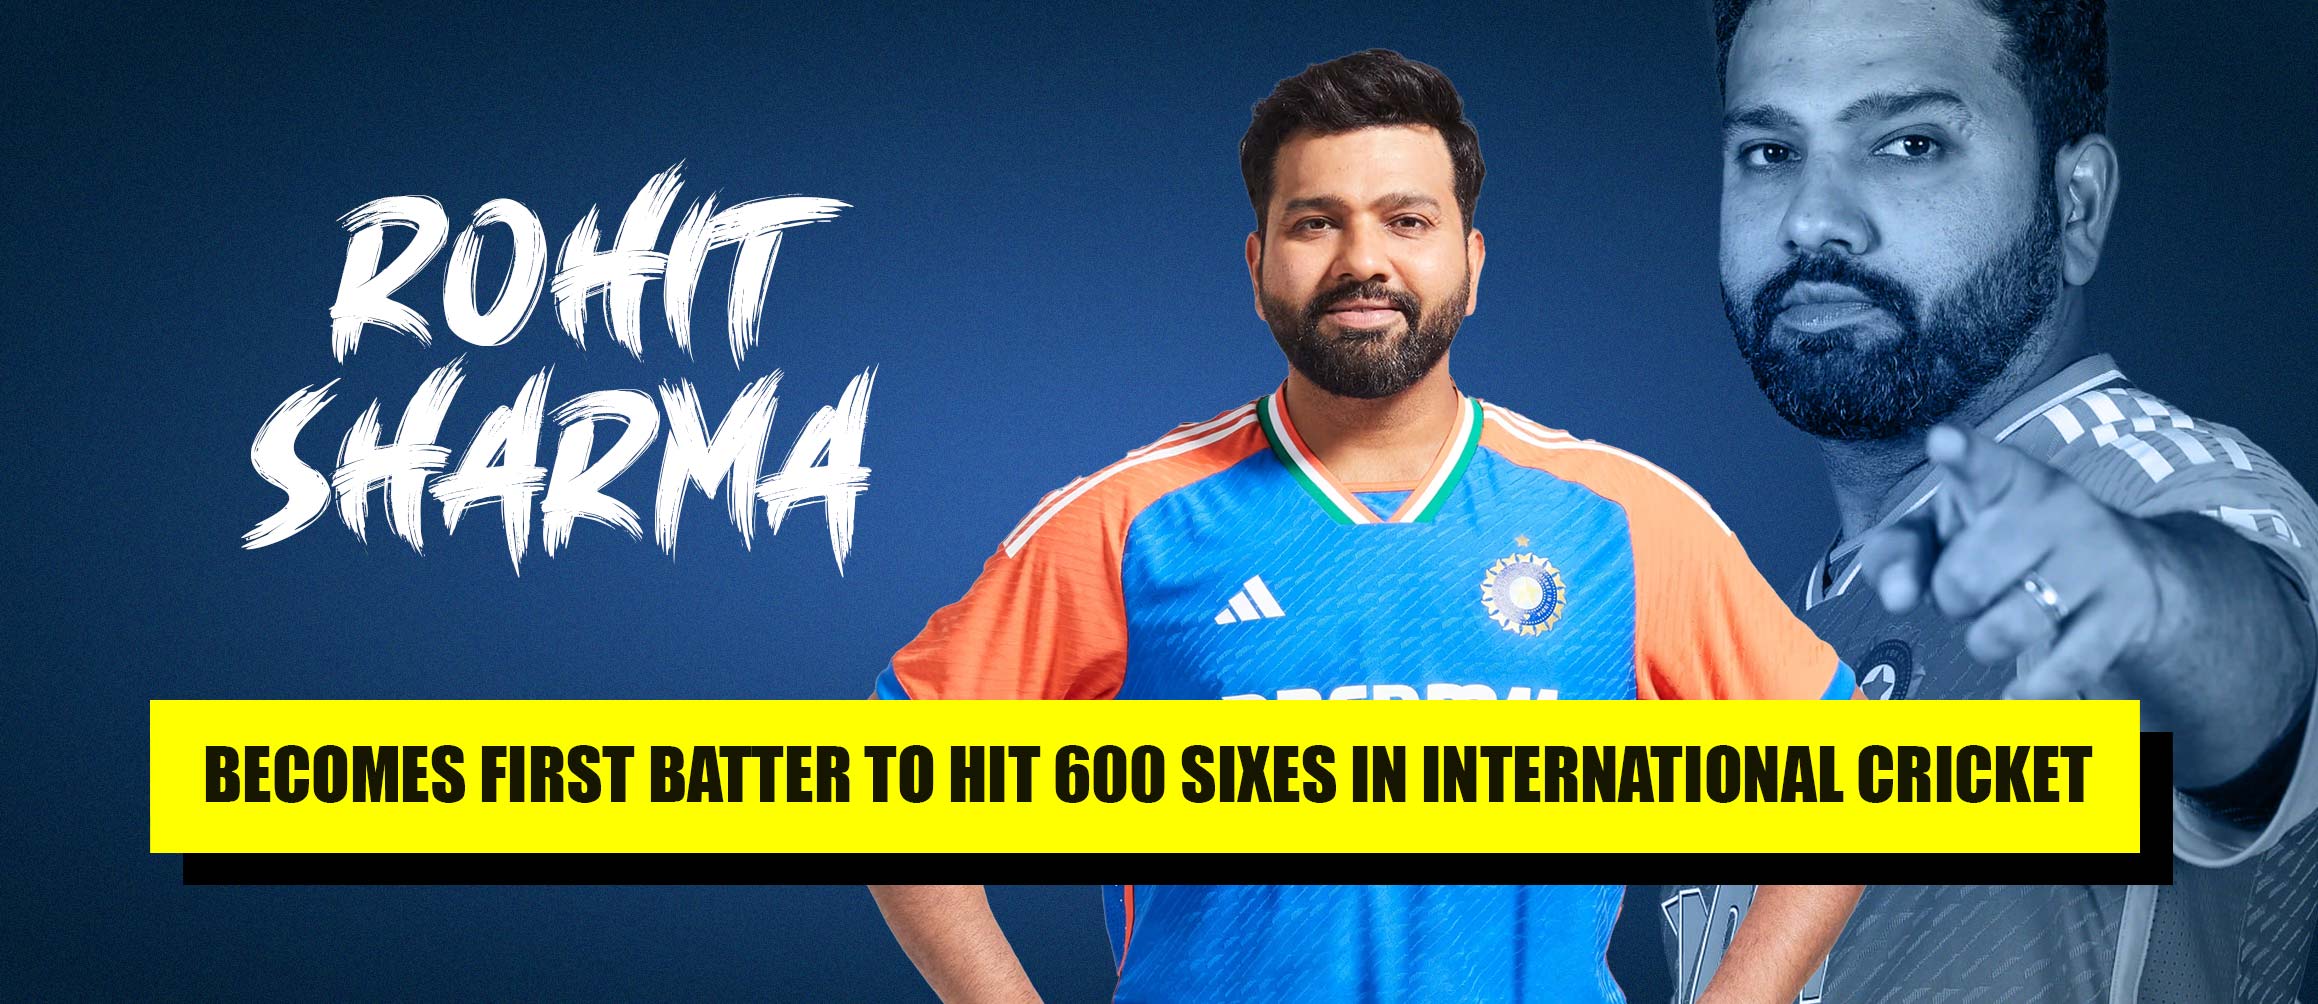 Rohit Sharma Becomes First Batter to Hit 600 Sixes in International Cricket